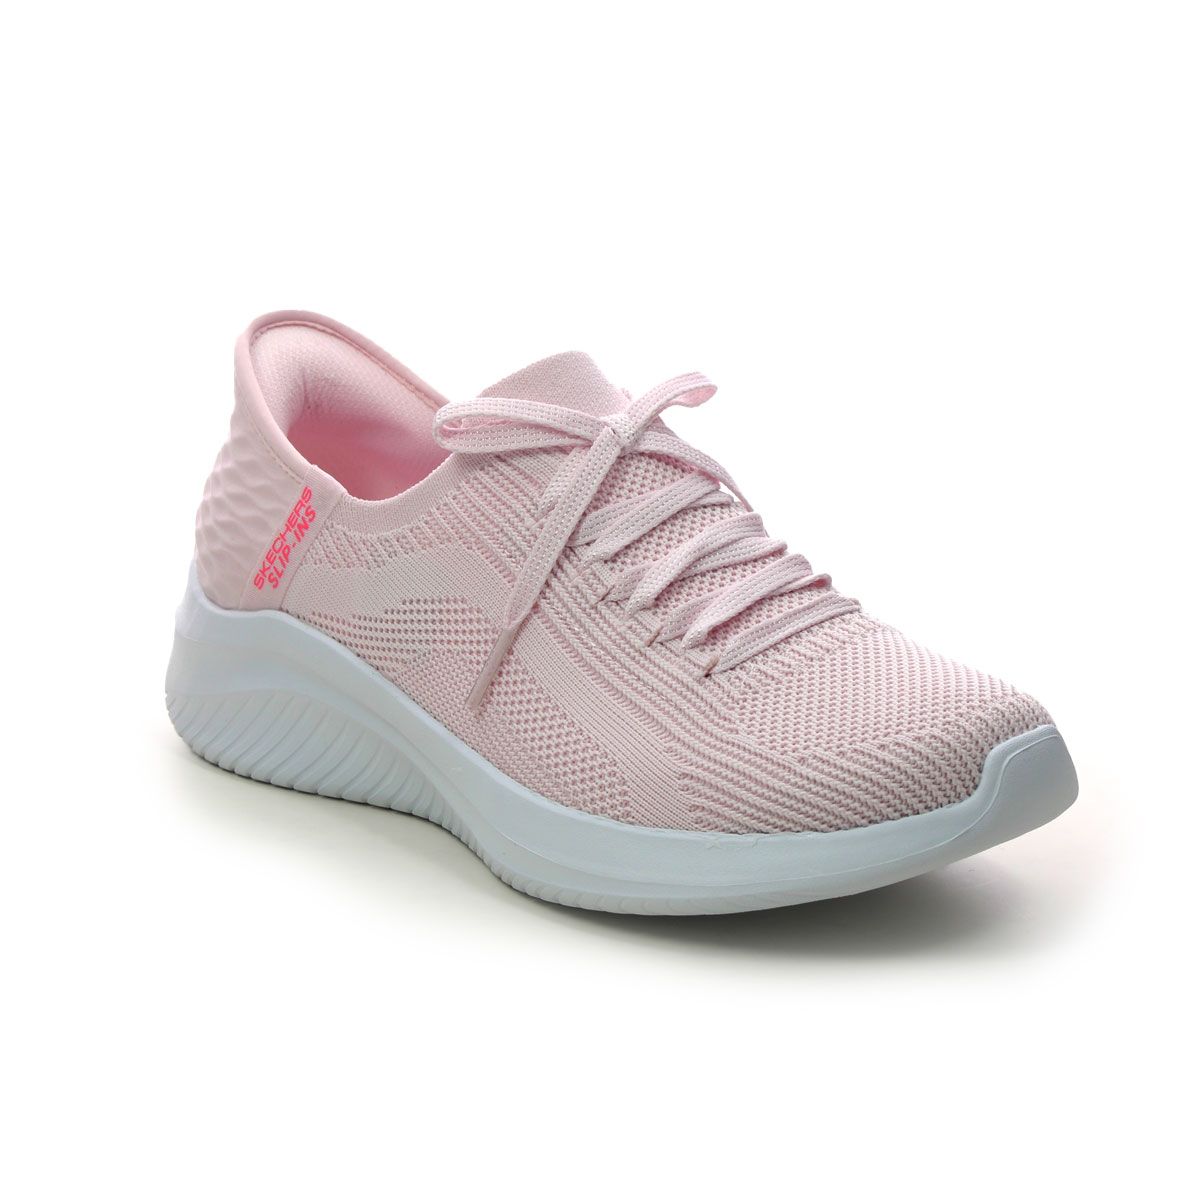 Skechers Slip Ins Ultra LTPK Light pink Womens trainers 149710 in a Plain Textile in Size 5